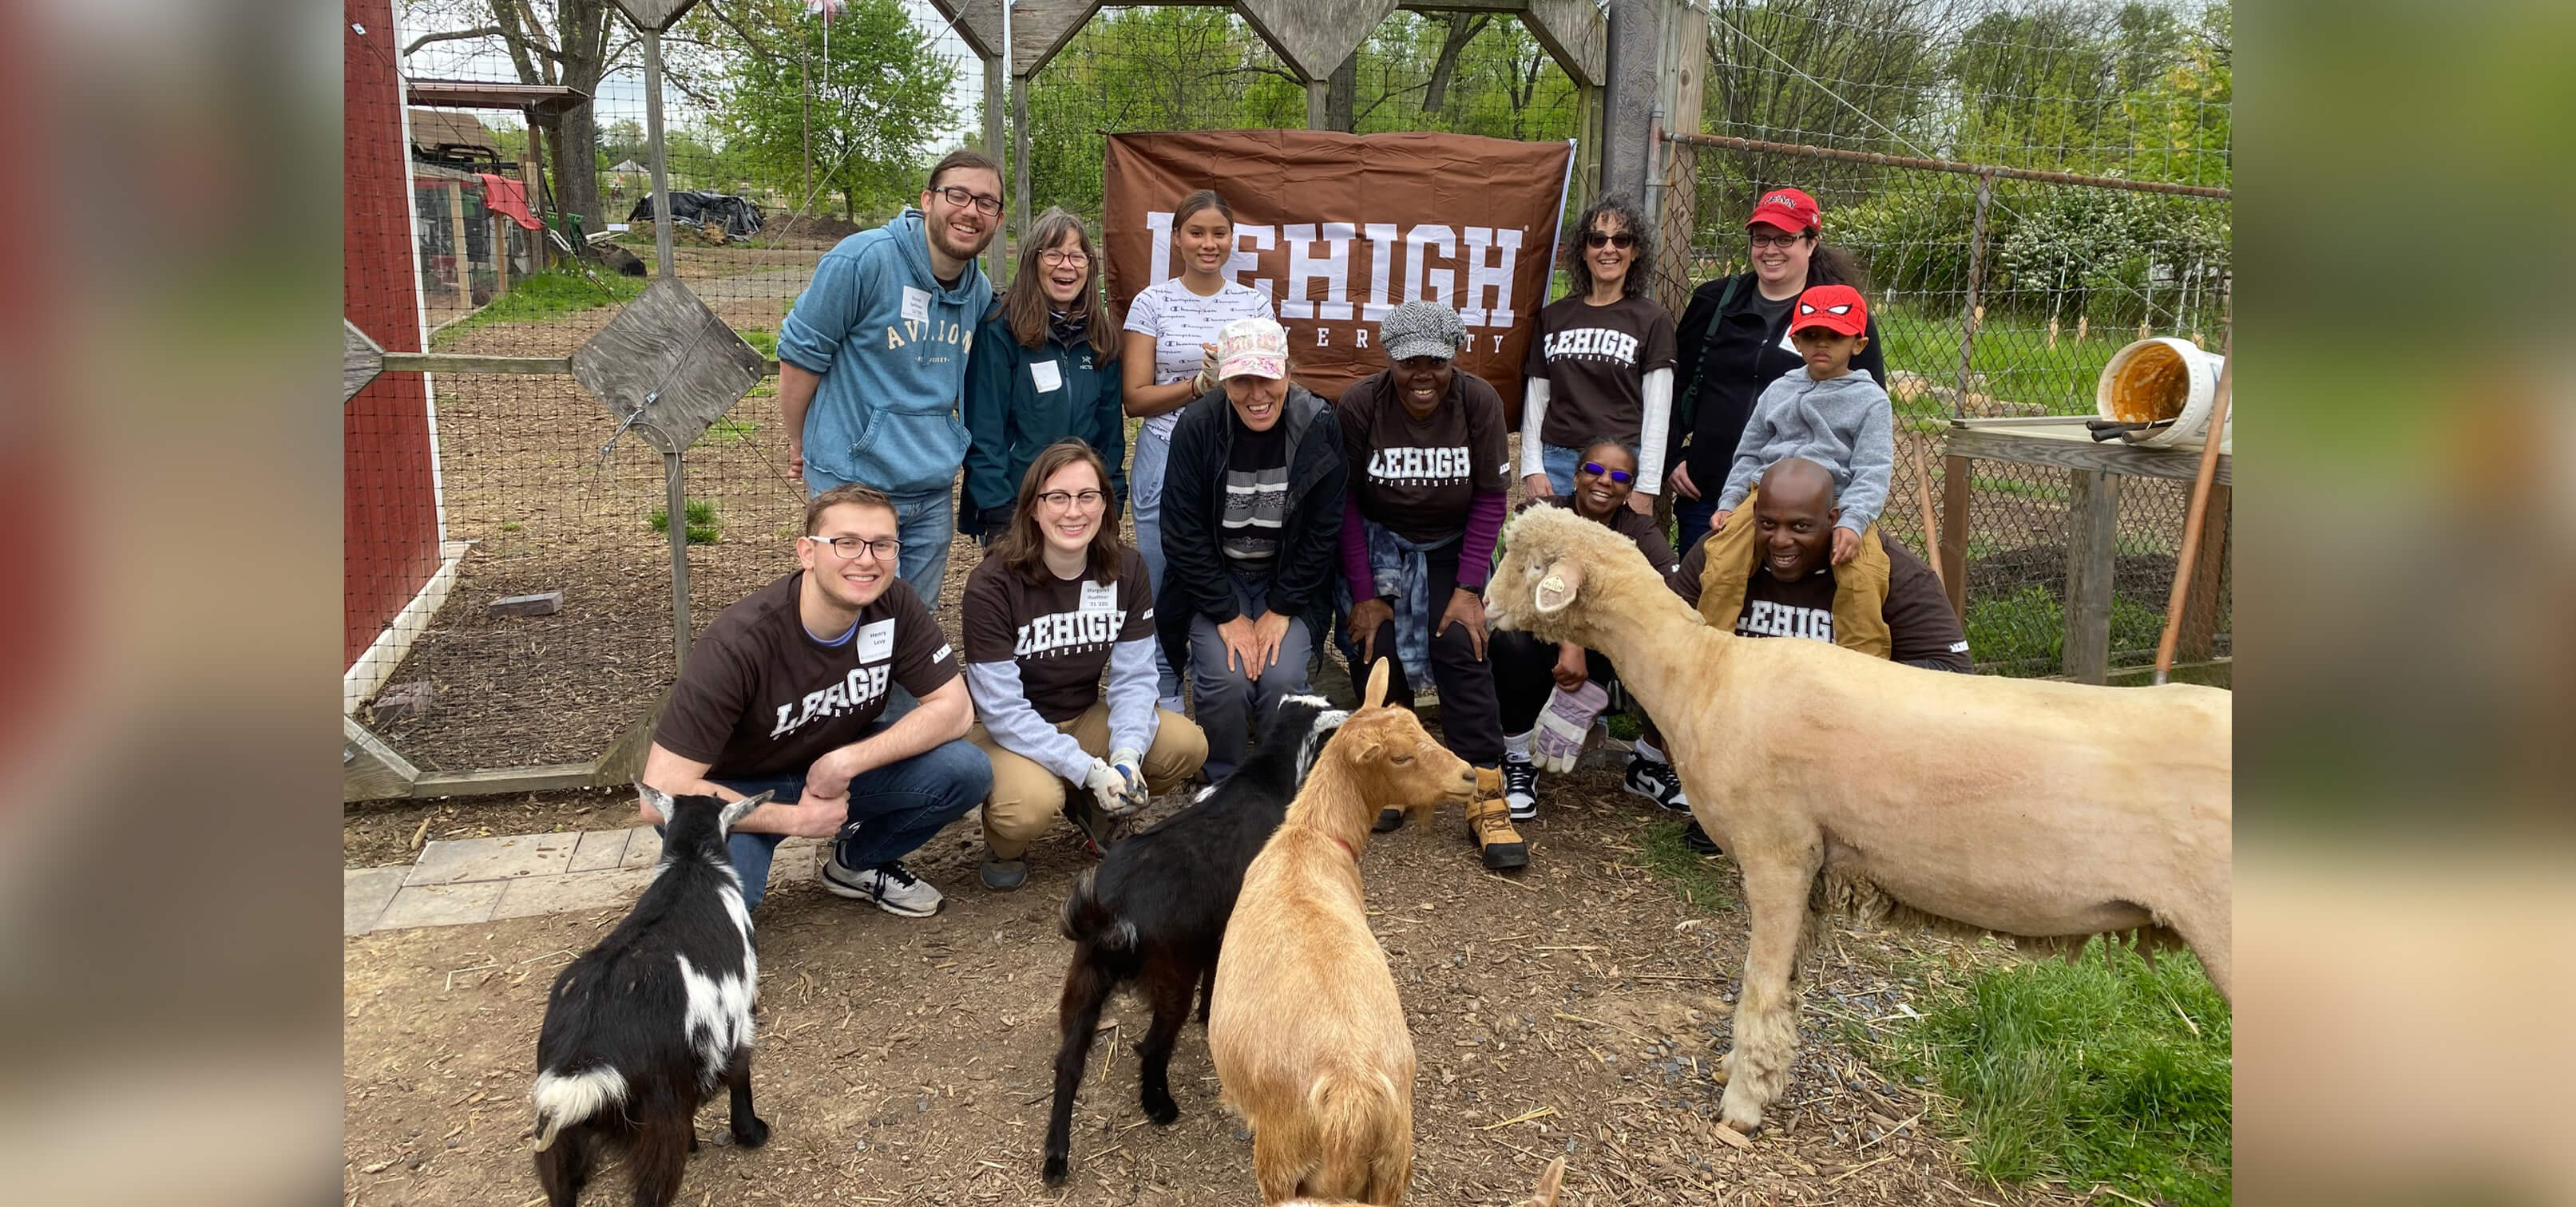 A group of alumni gather for a photo on a farm with goats with a Lehigh banner hanging on the fence behind them.